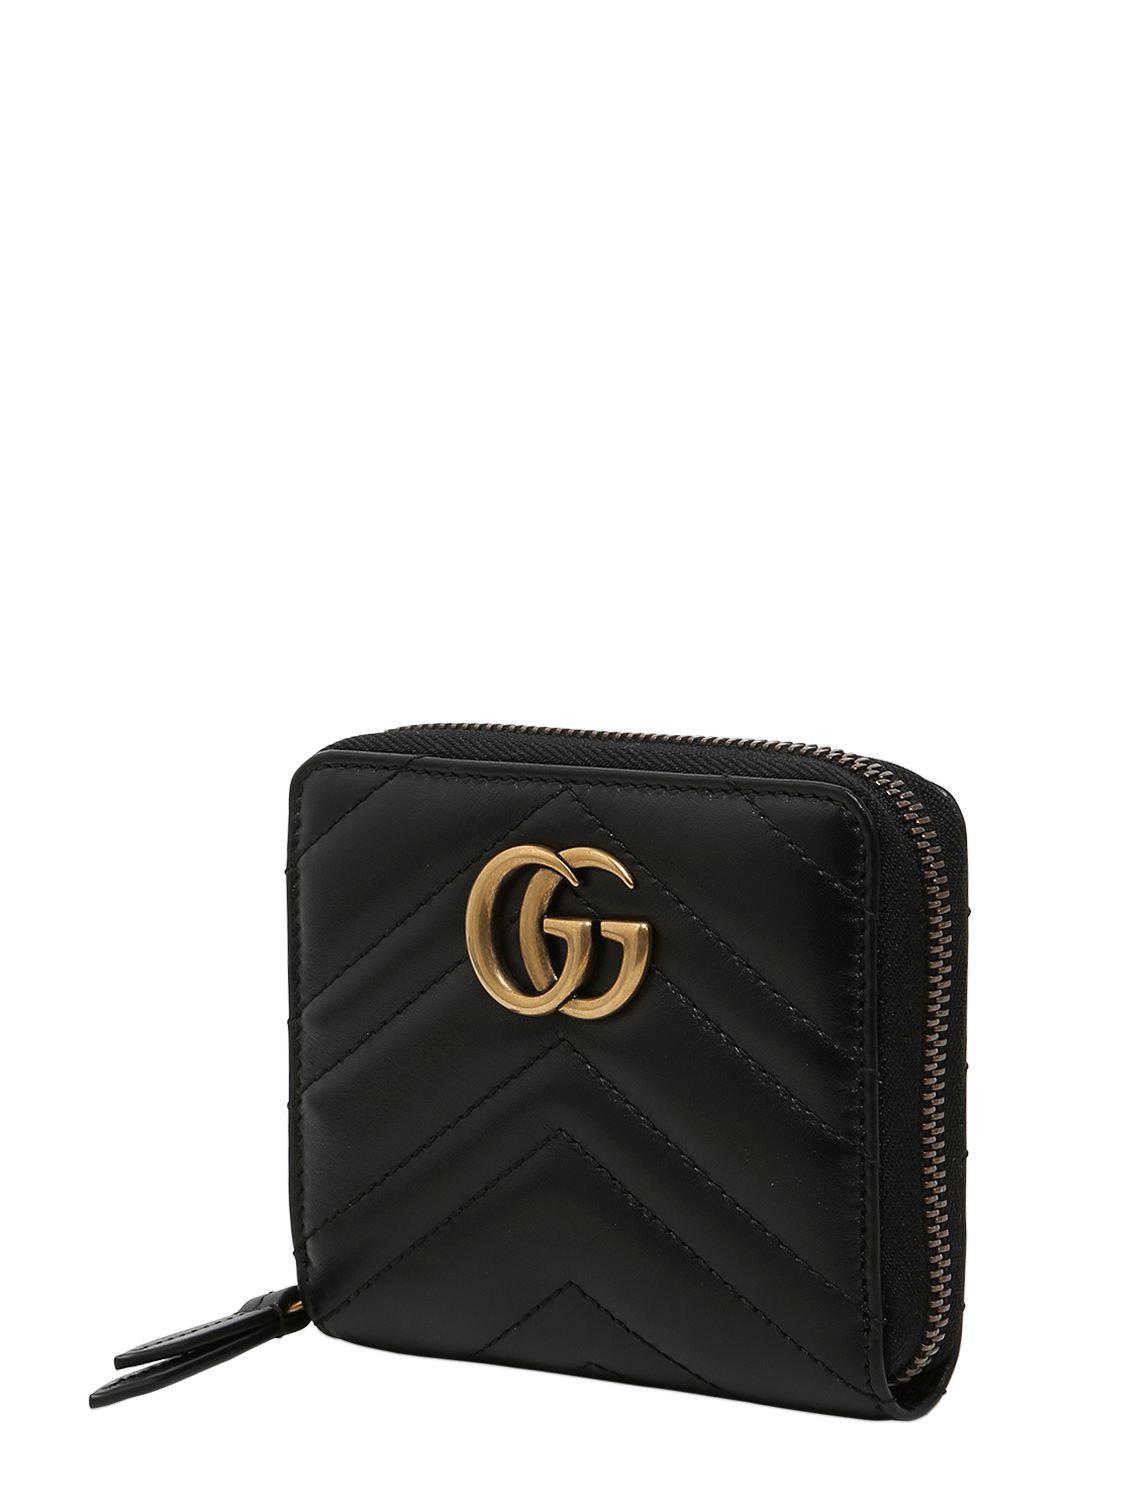 Gucci Small Gg Marmont 2.0 Leather Zip Wallet in Black